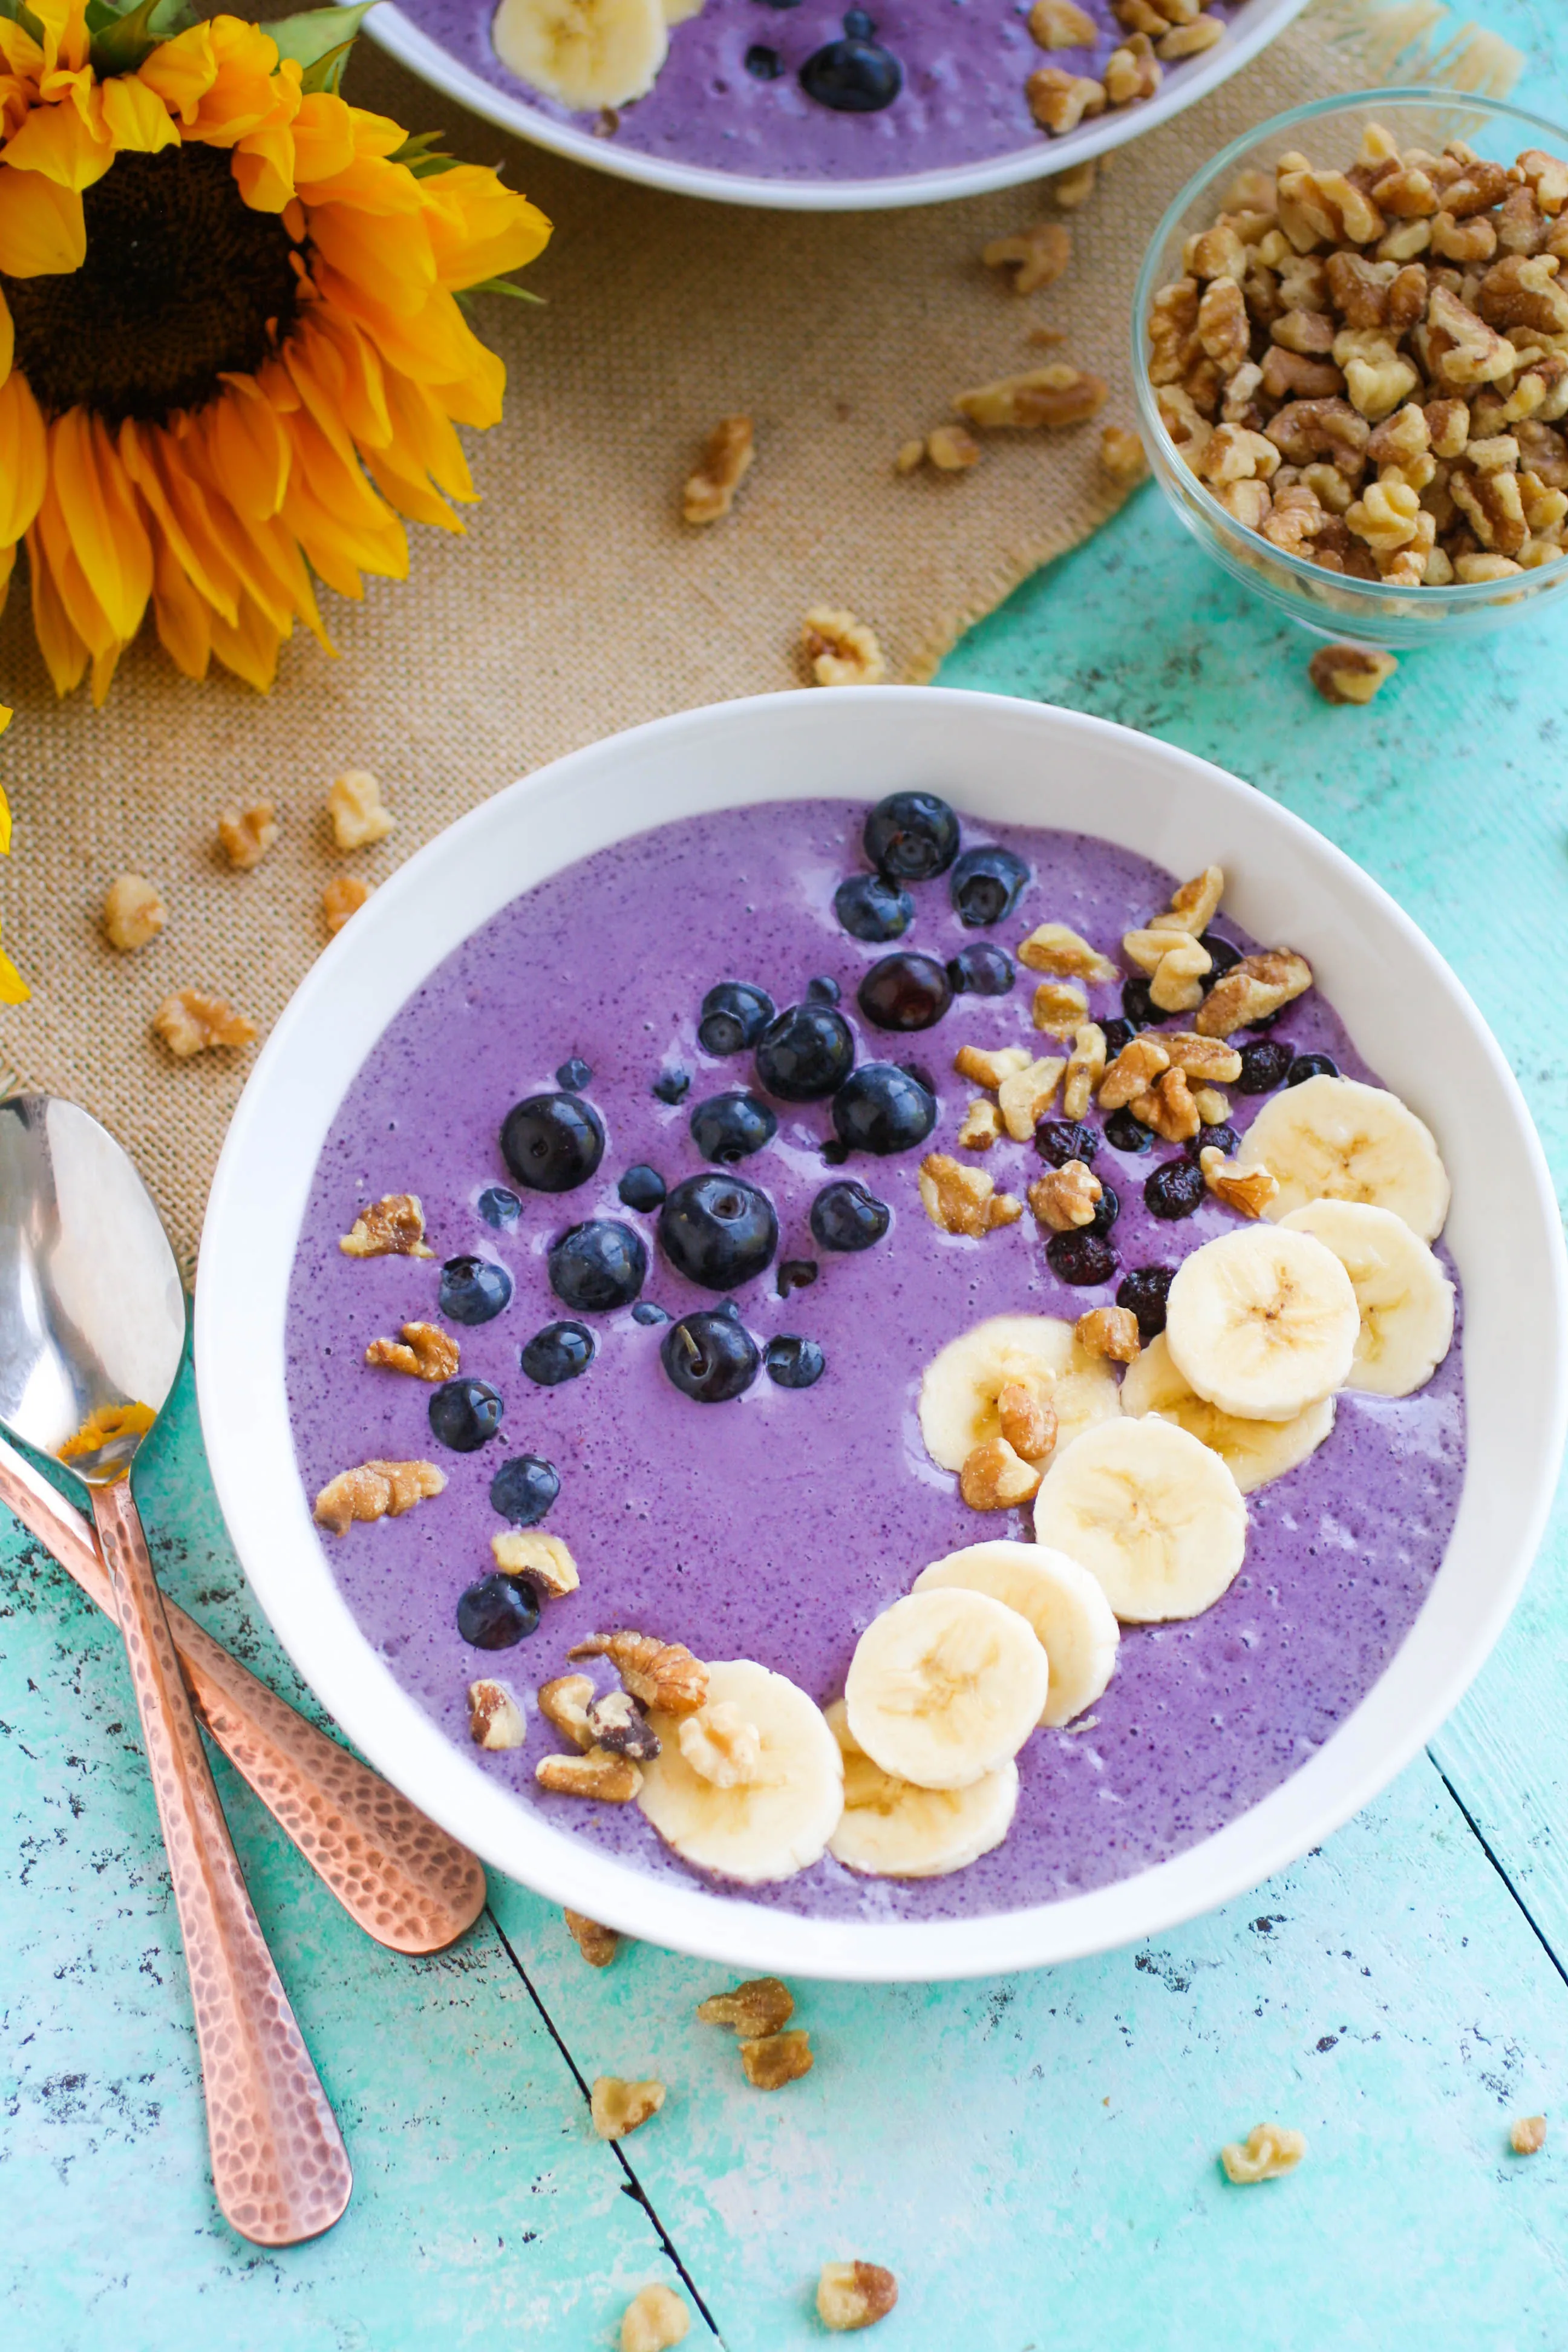 Blueberry Banana Walnut Smoothie Bowls are ideal for breakfast. Walnut Smoothie Bowls are full of great ingredients, perfect for breakfast.